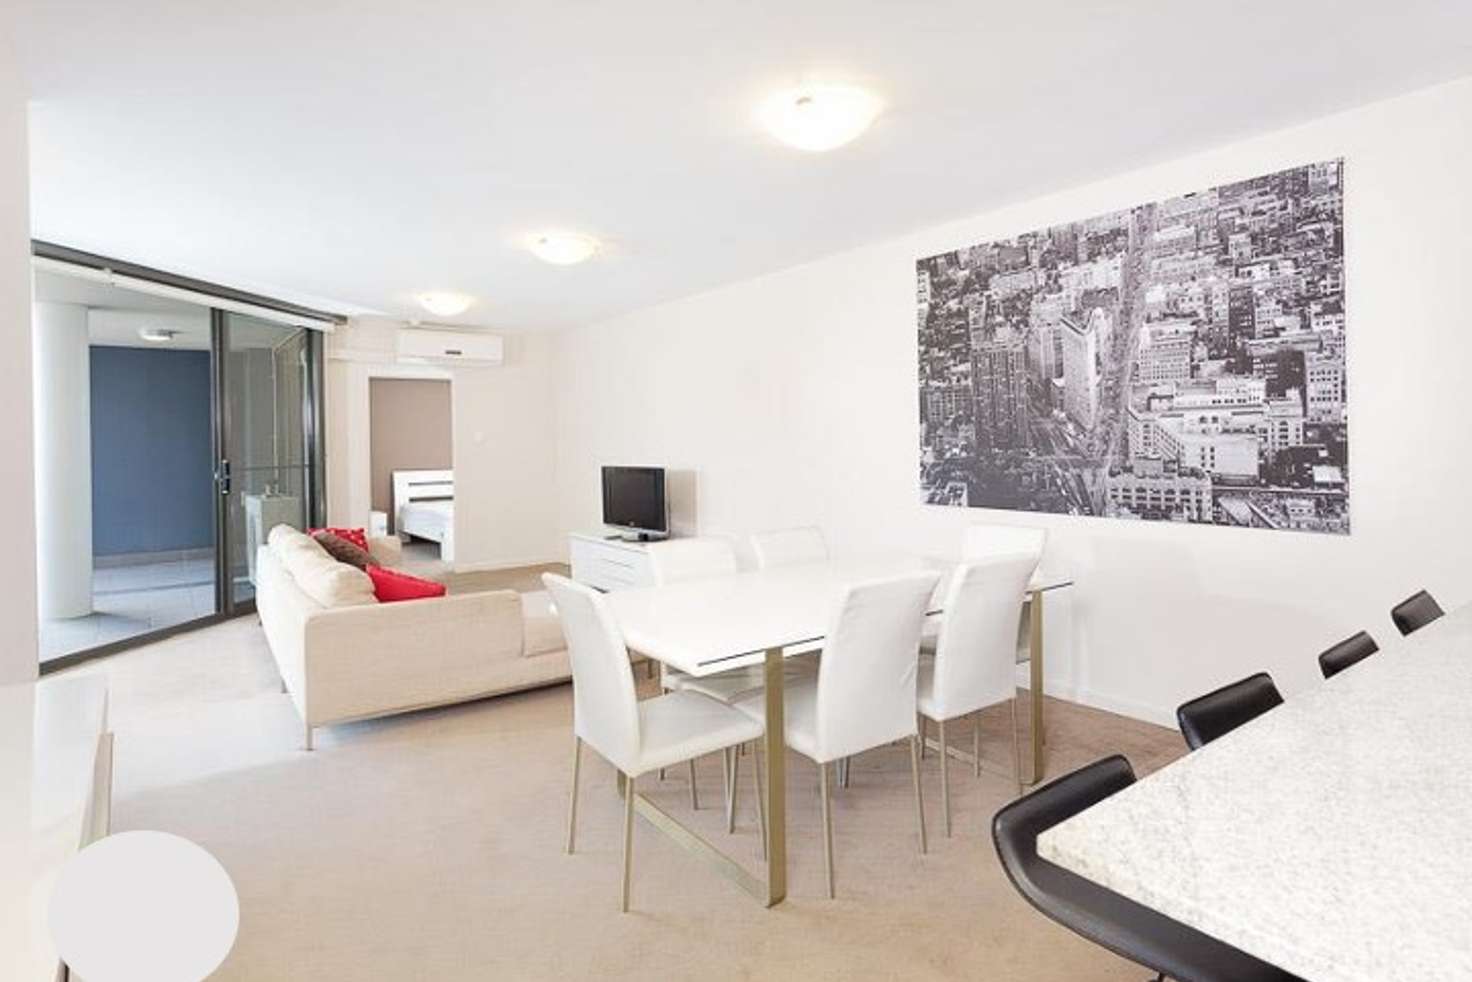 Main view of Homely apartment listing, 143/369 Hay Street, East Perth WA 6004